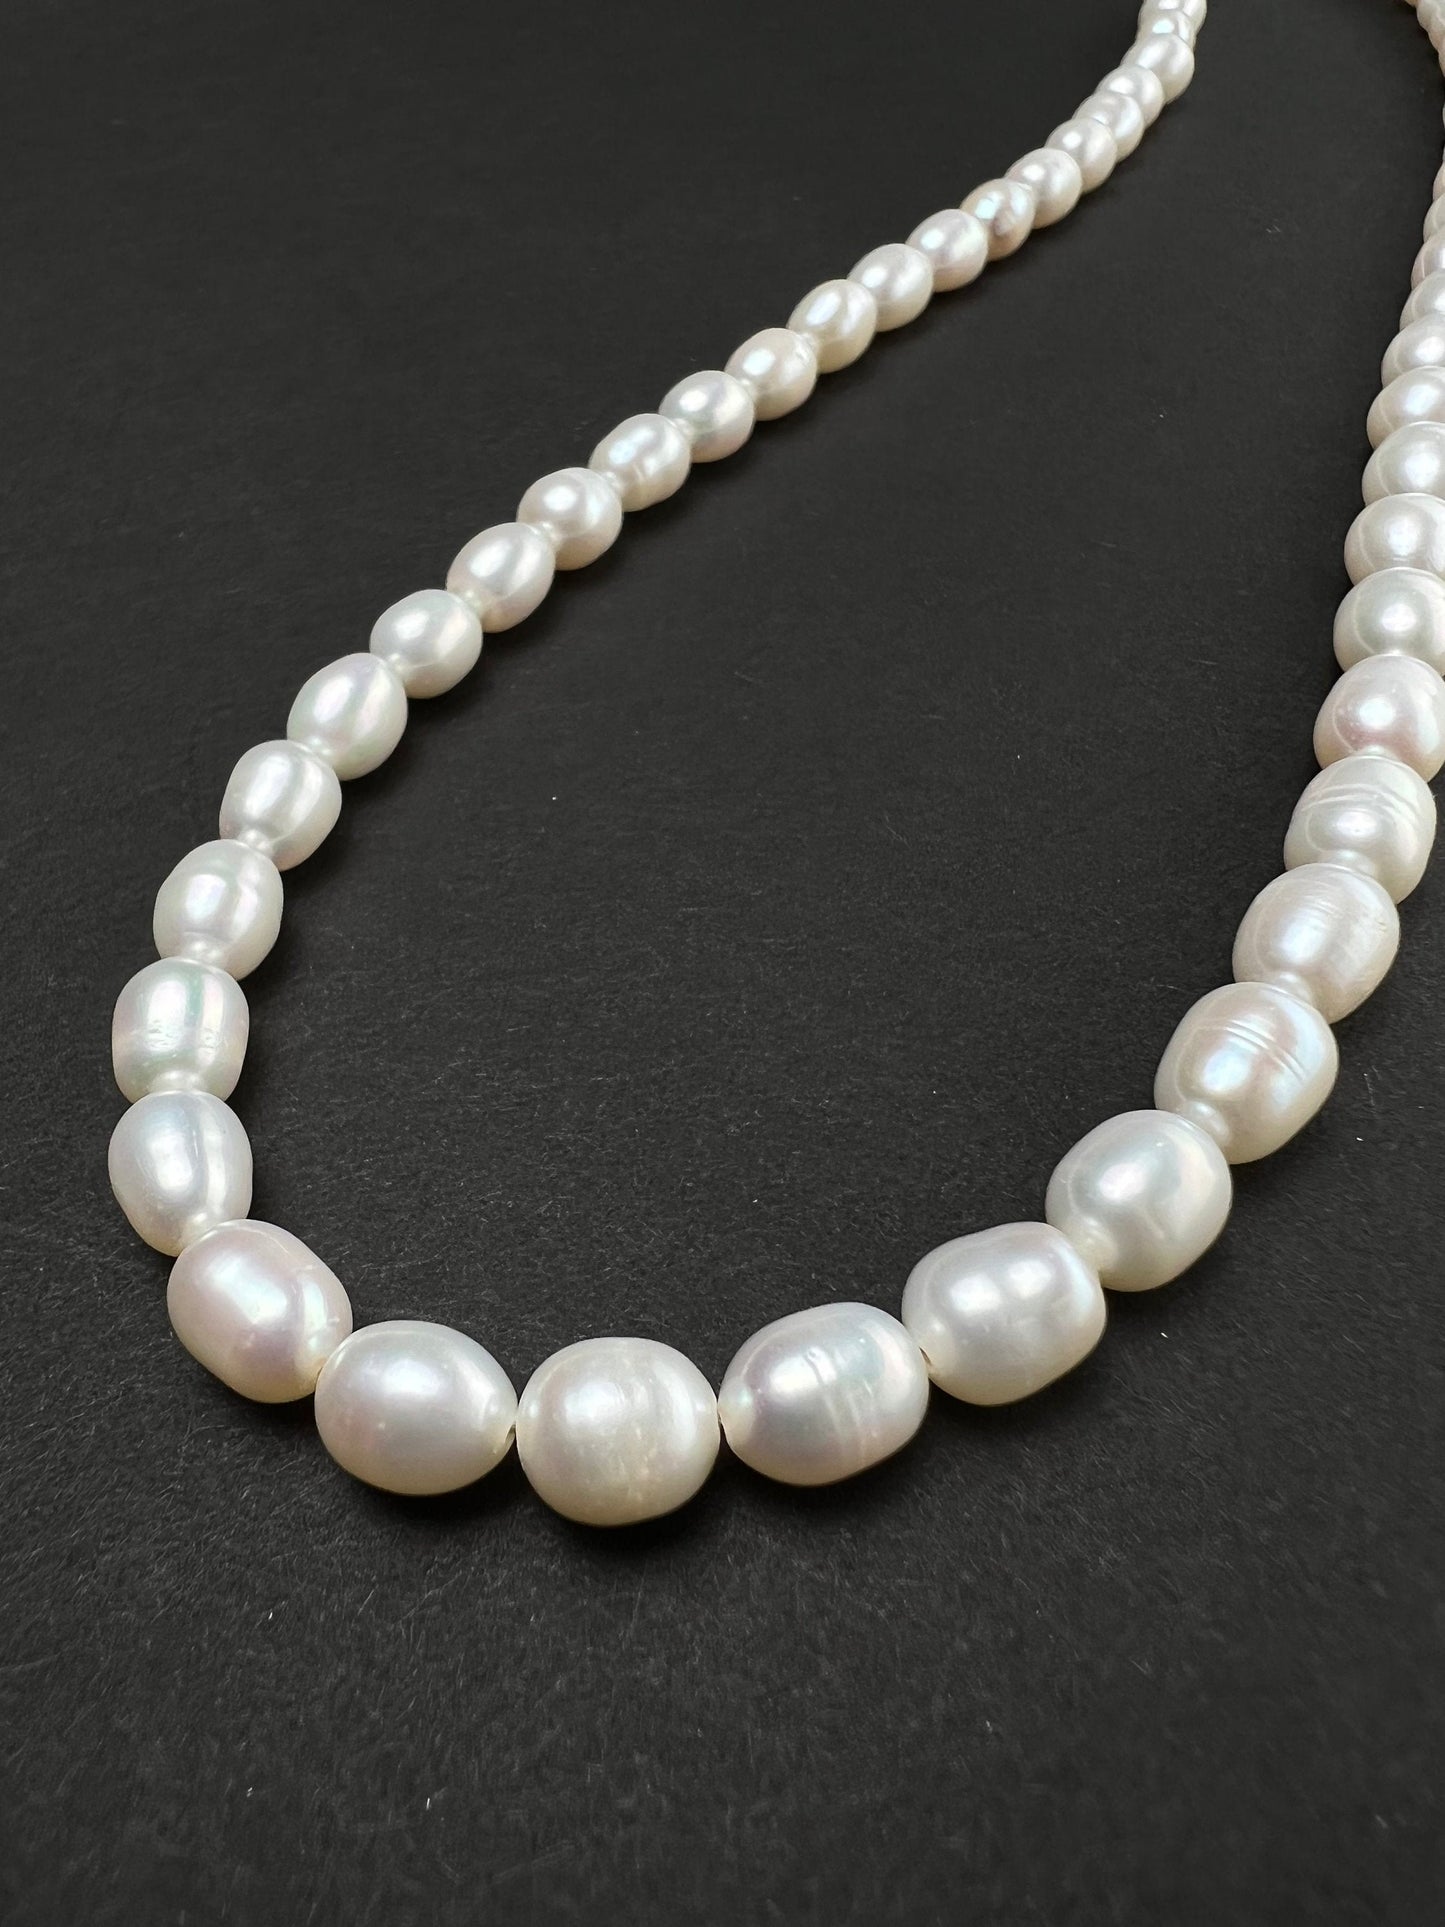 Genuine Freshwater Pearl 6-7mm Potato oval AAA high luster pearl with silver Necklace, Choker, Layering, Minimalist Gift for Man and woman